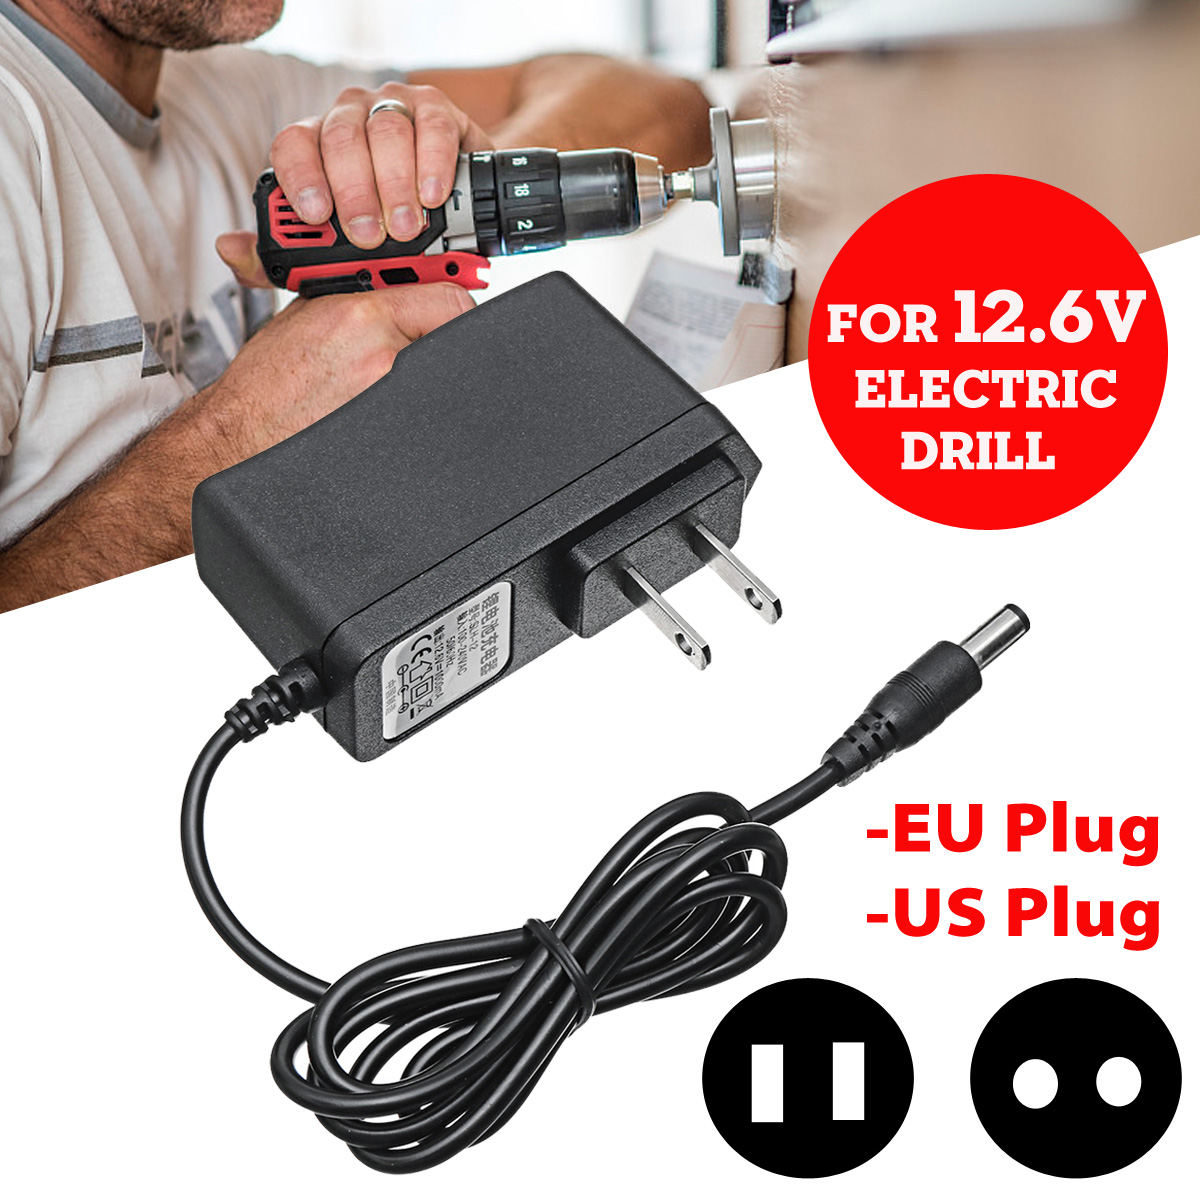 12V-Power-Supply-AC-to-DC-Adapter-EU-US-Plug-Optional-Power-Converter-for-Electric-Drill-1438301-1